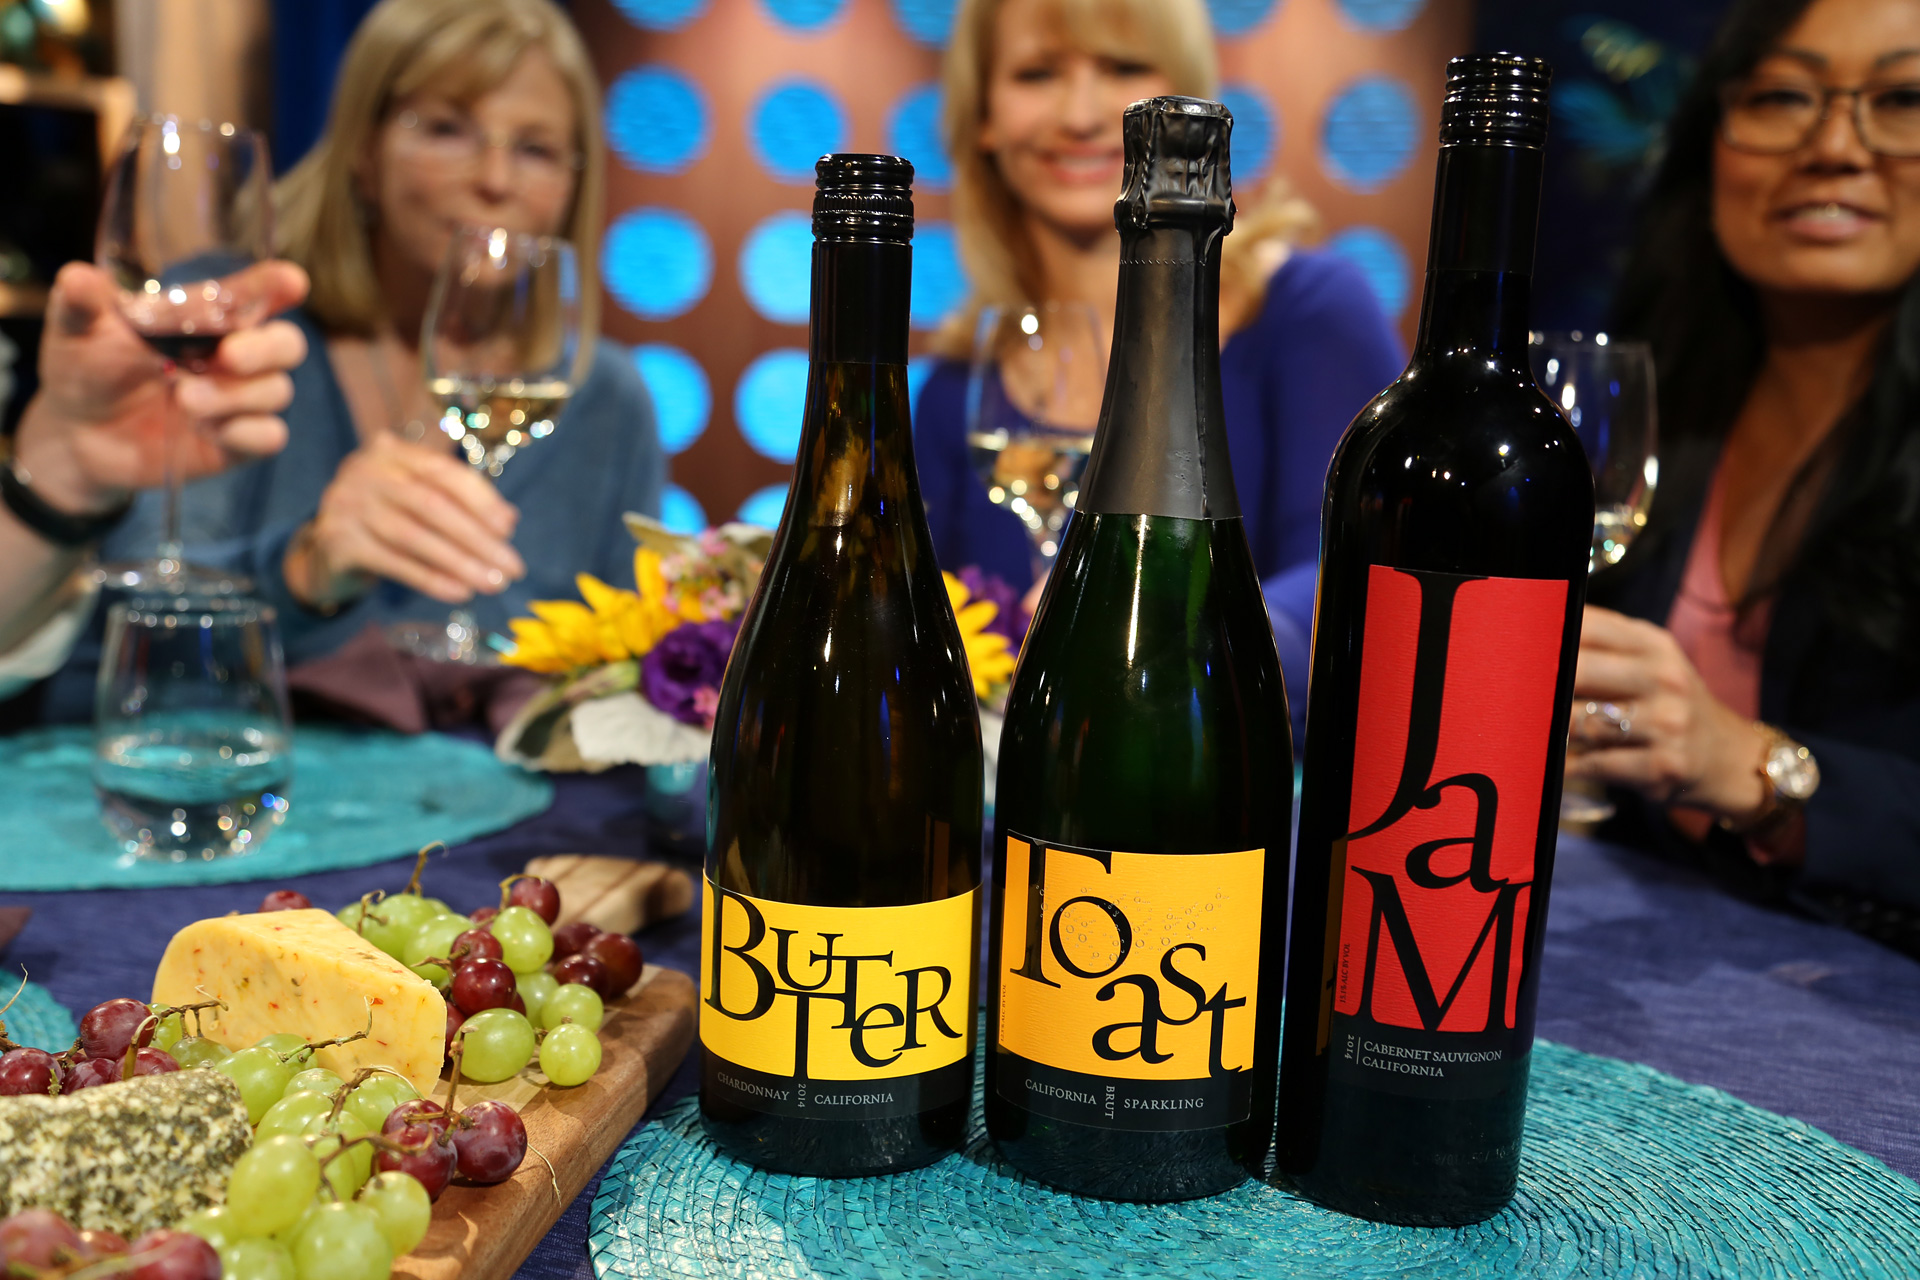 Wines that guests drank on the set of the third episode of season 11.